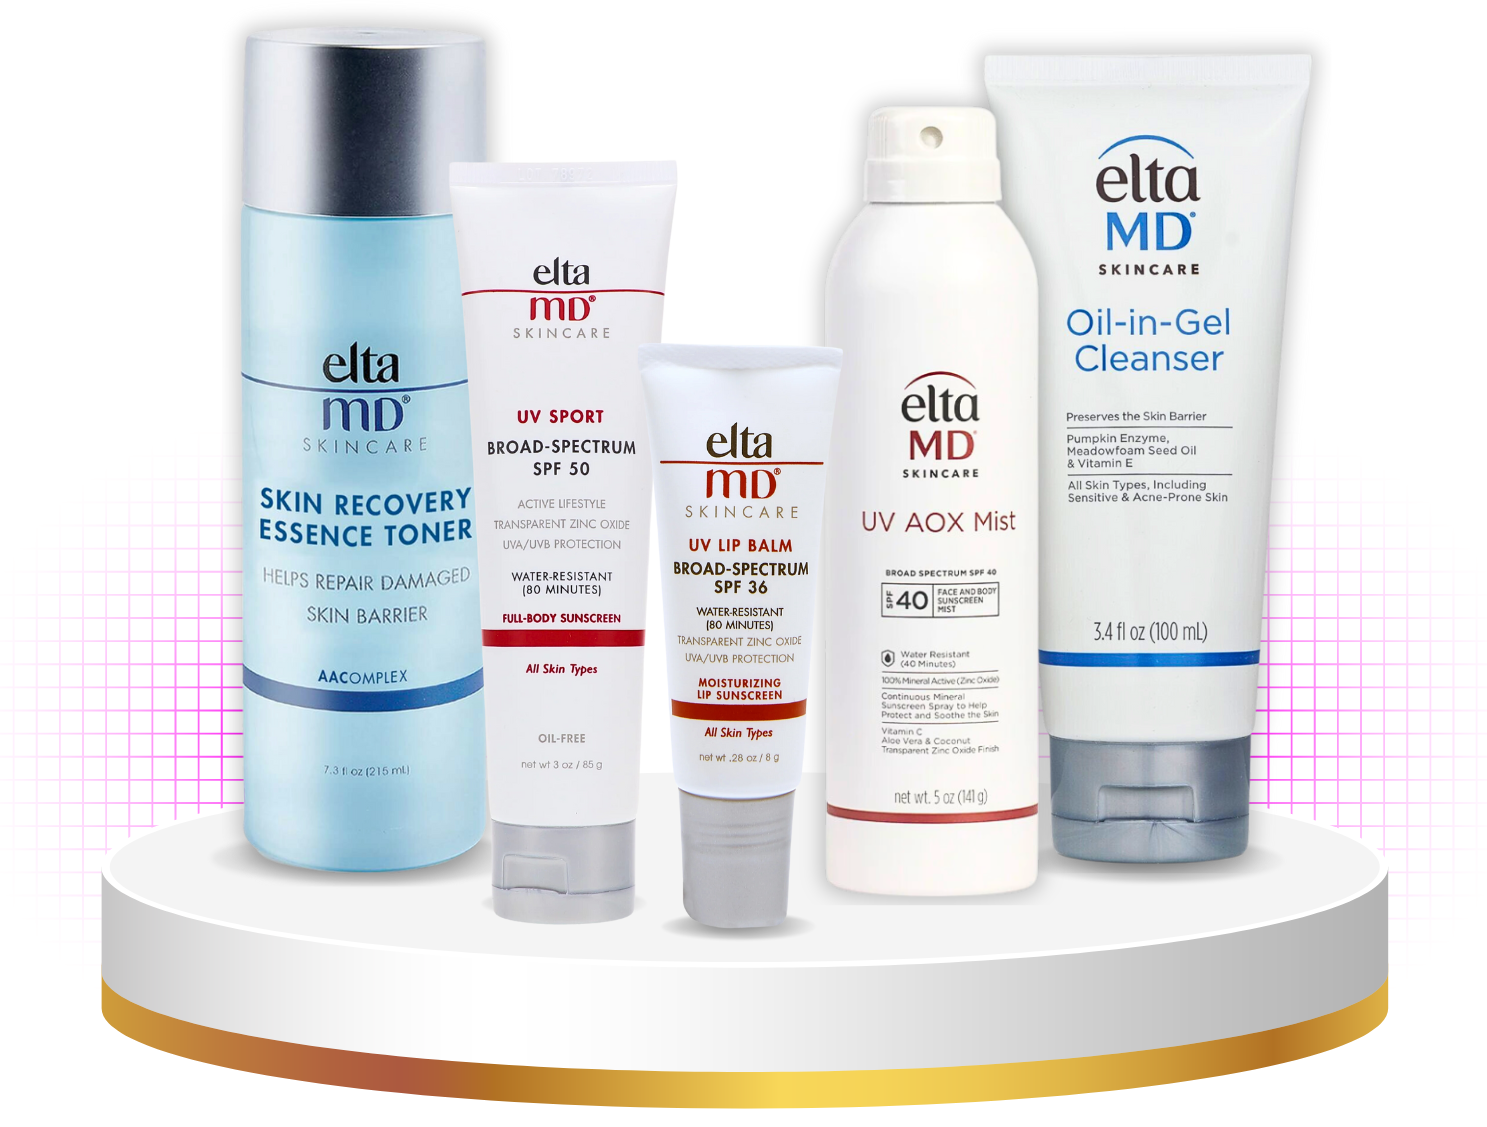 Elta MD products